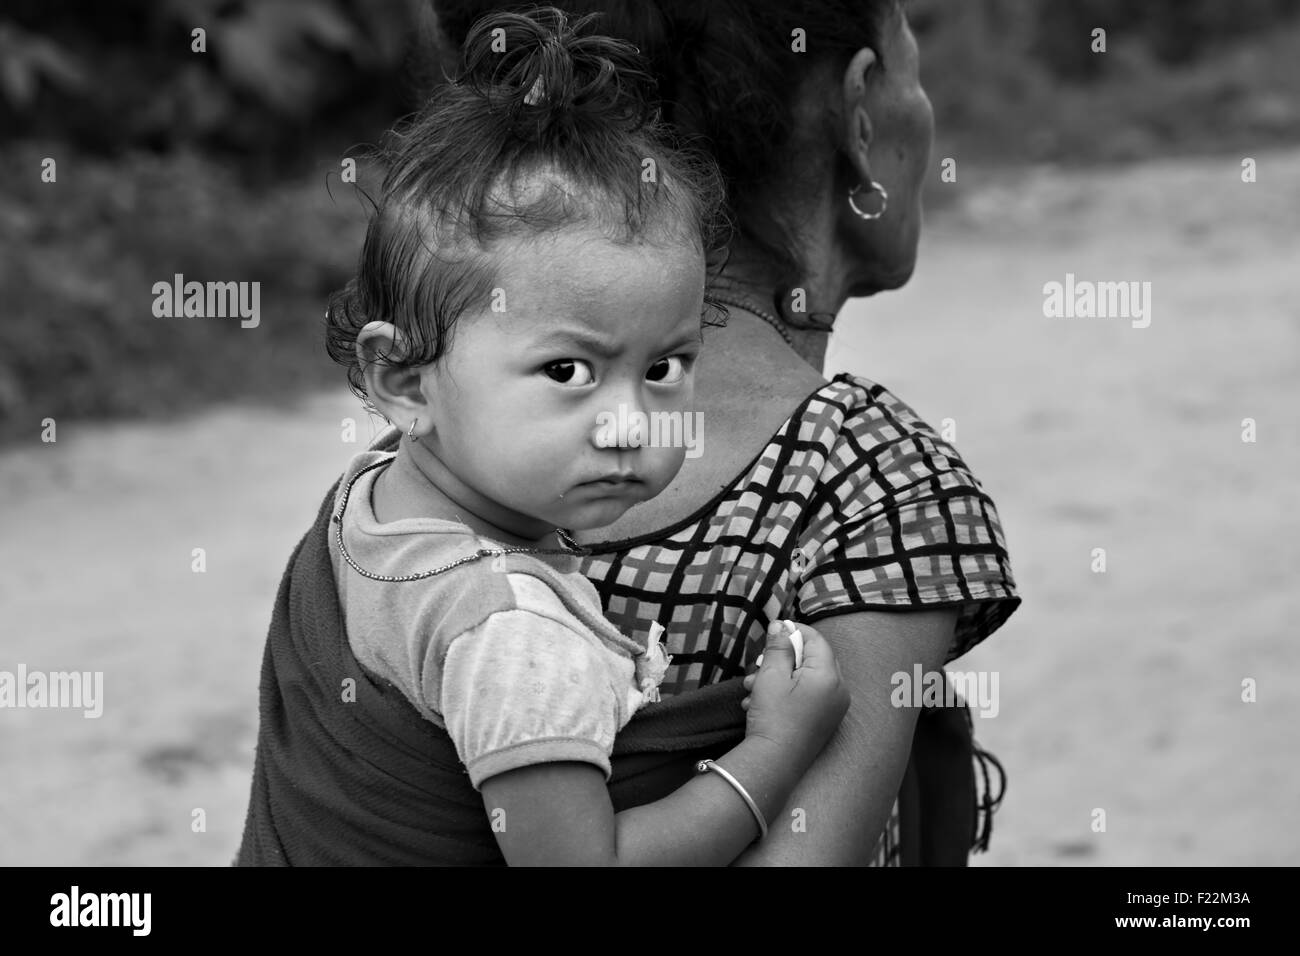 candid portrait of a cute Nepalese baby riding on her grandmother's back Stock Photo